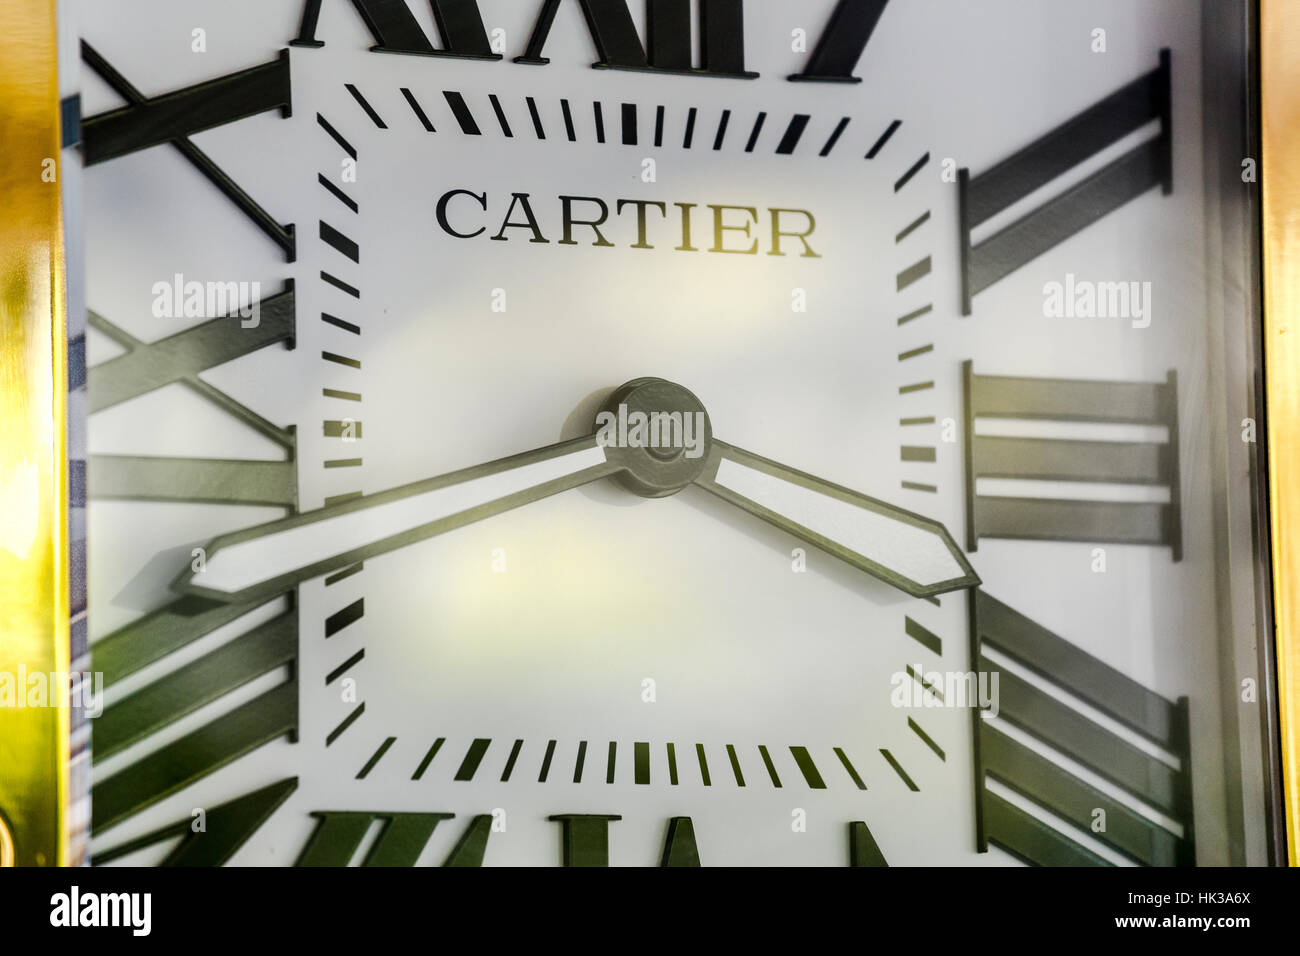 Close up of square luxury wall clock Cartier Stock Photo